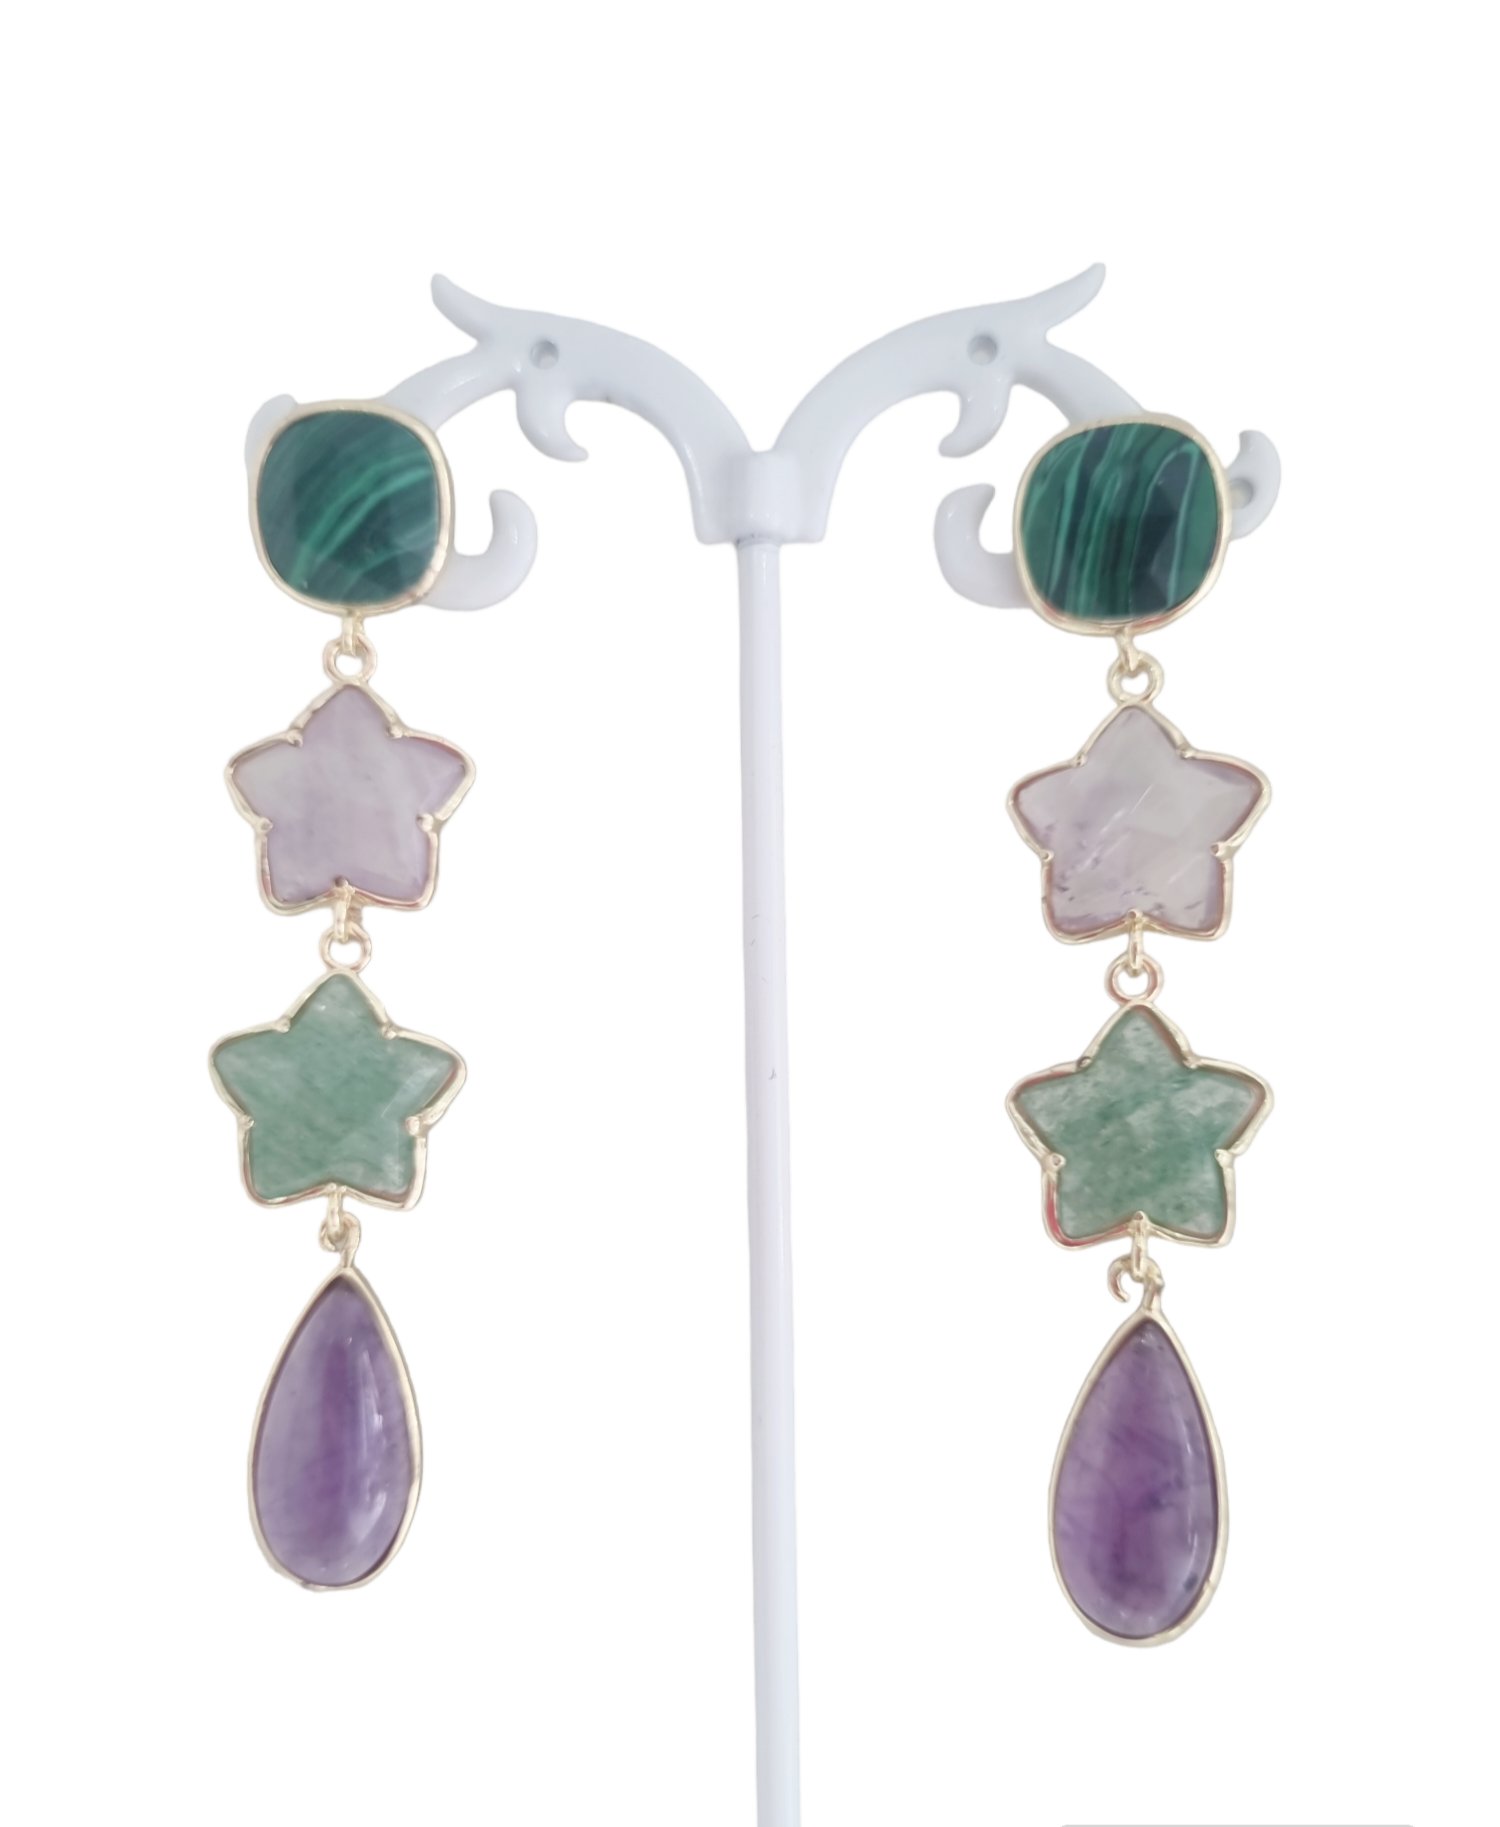 Earrings made with natural stones: quartz, amethyst and malachite. Length 7.5cm Weight 7.6gr